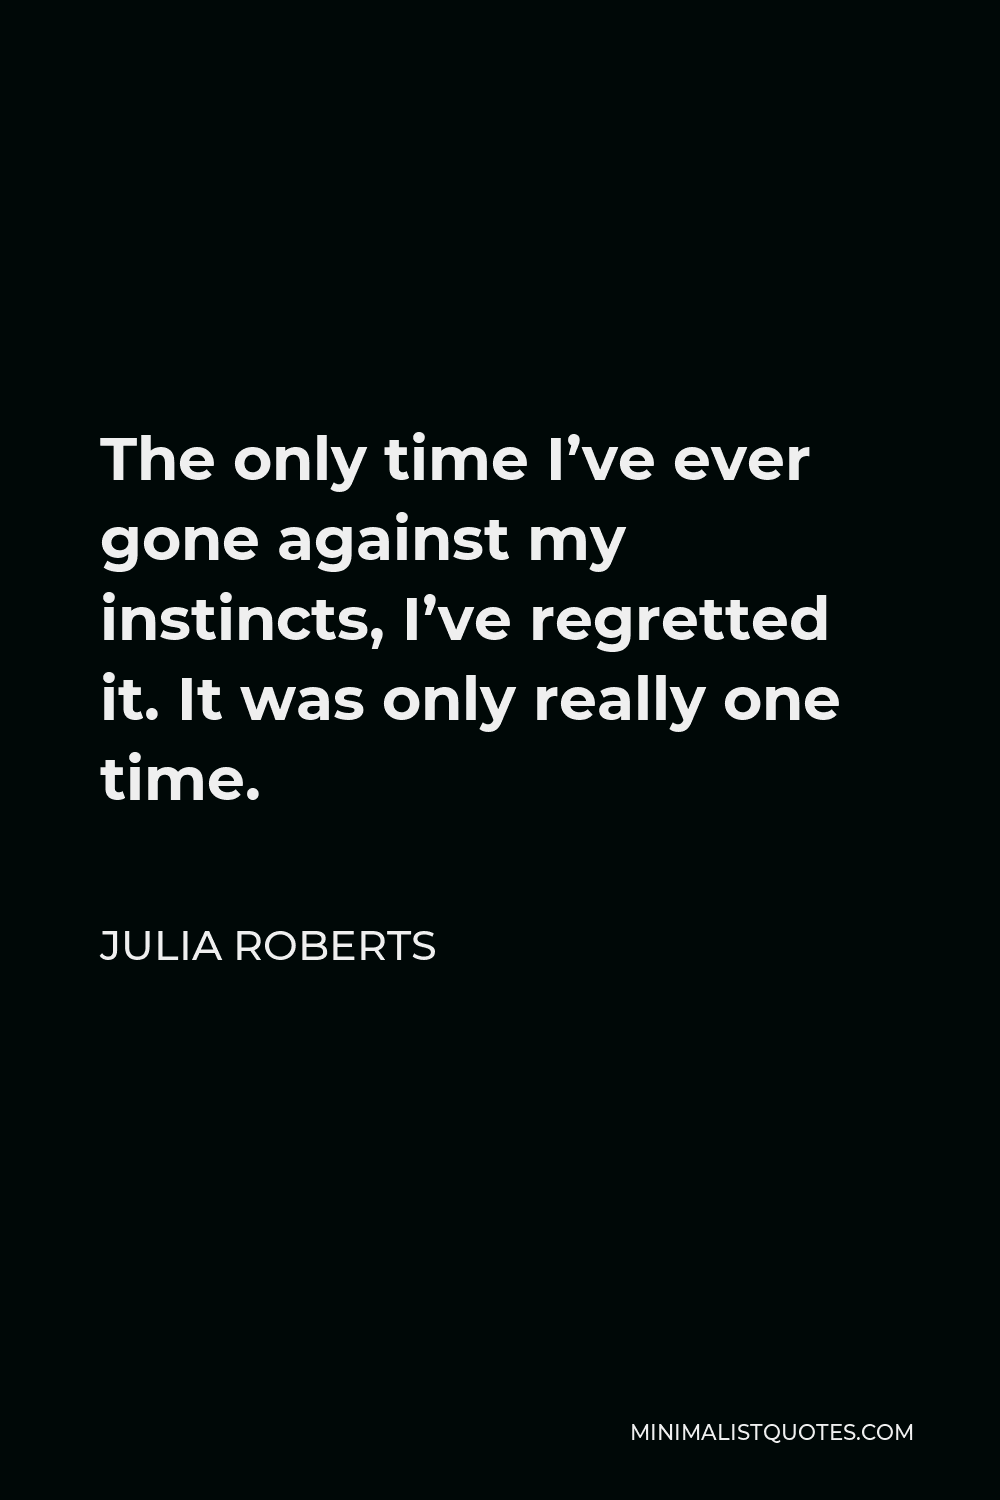 Julia Roberts Quote - The only time I’ve ever gone against my instincts, I’ve regretted it. It was only really one time.